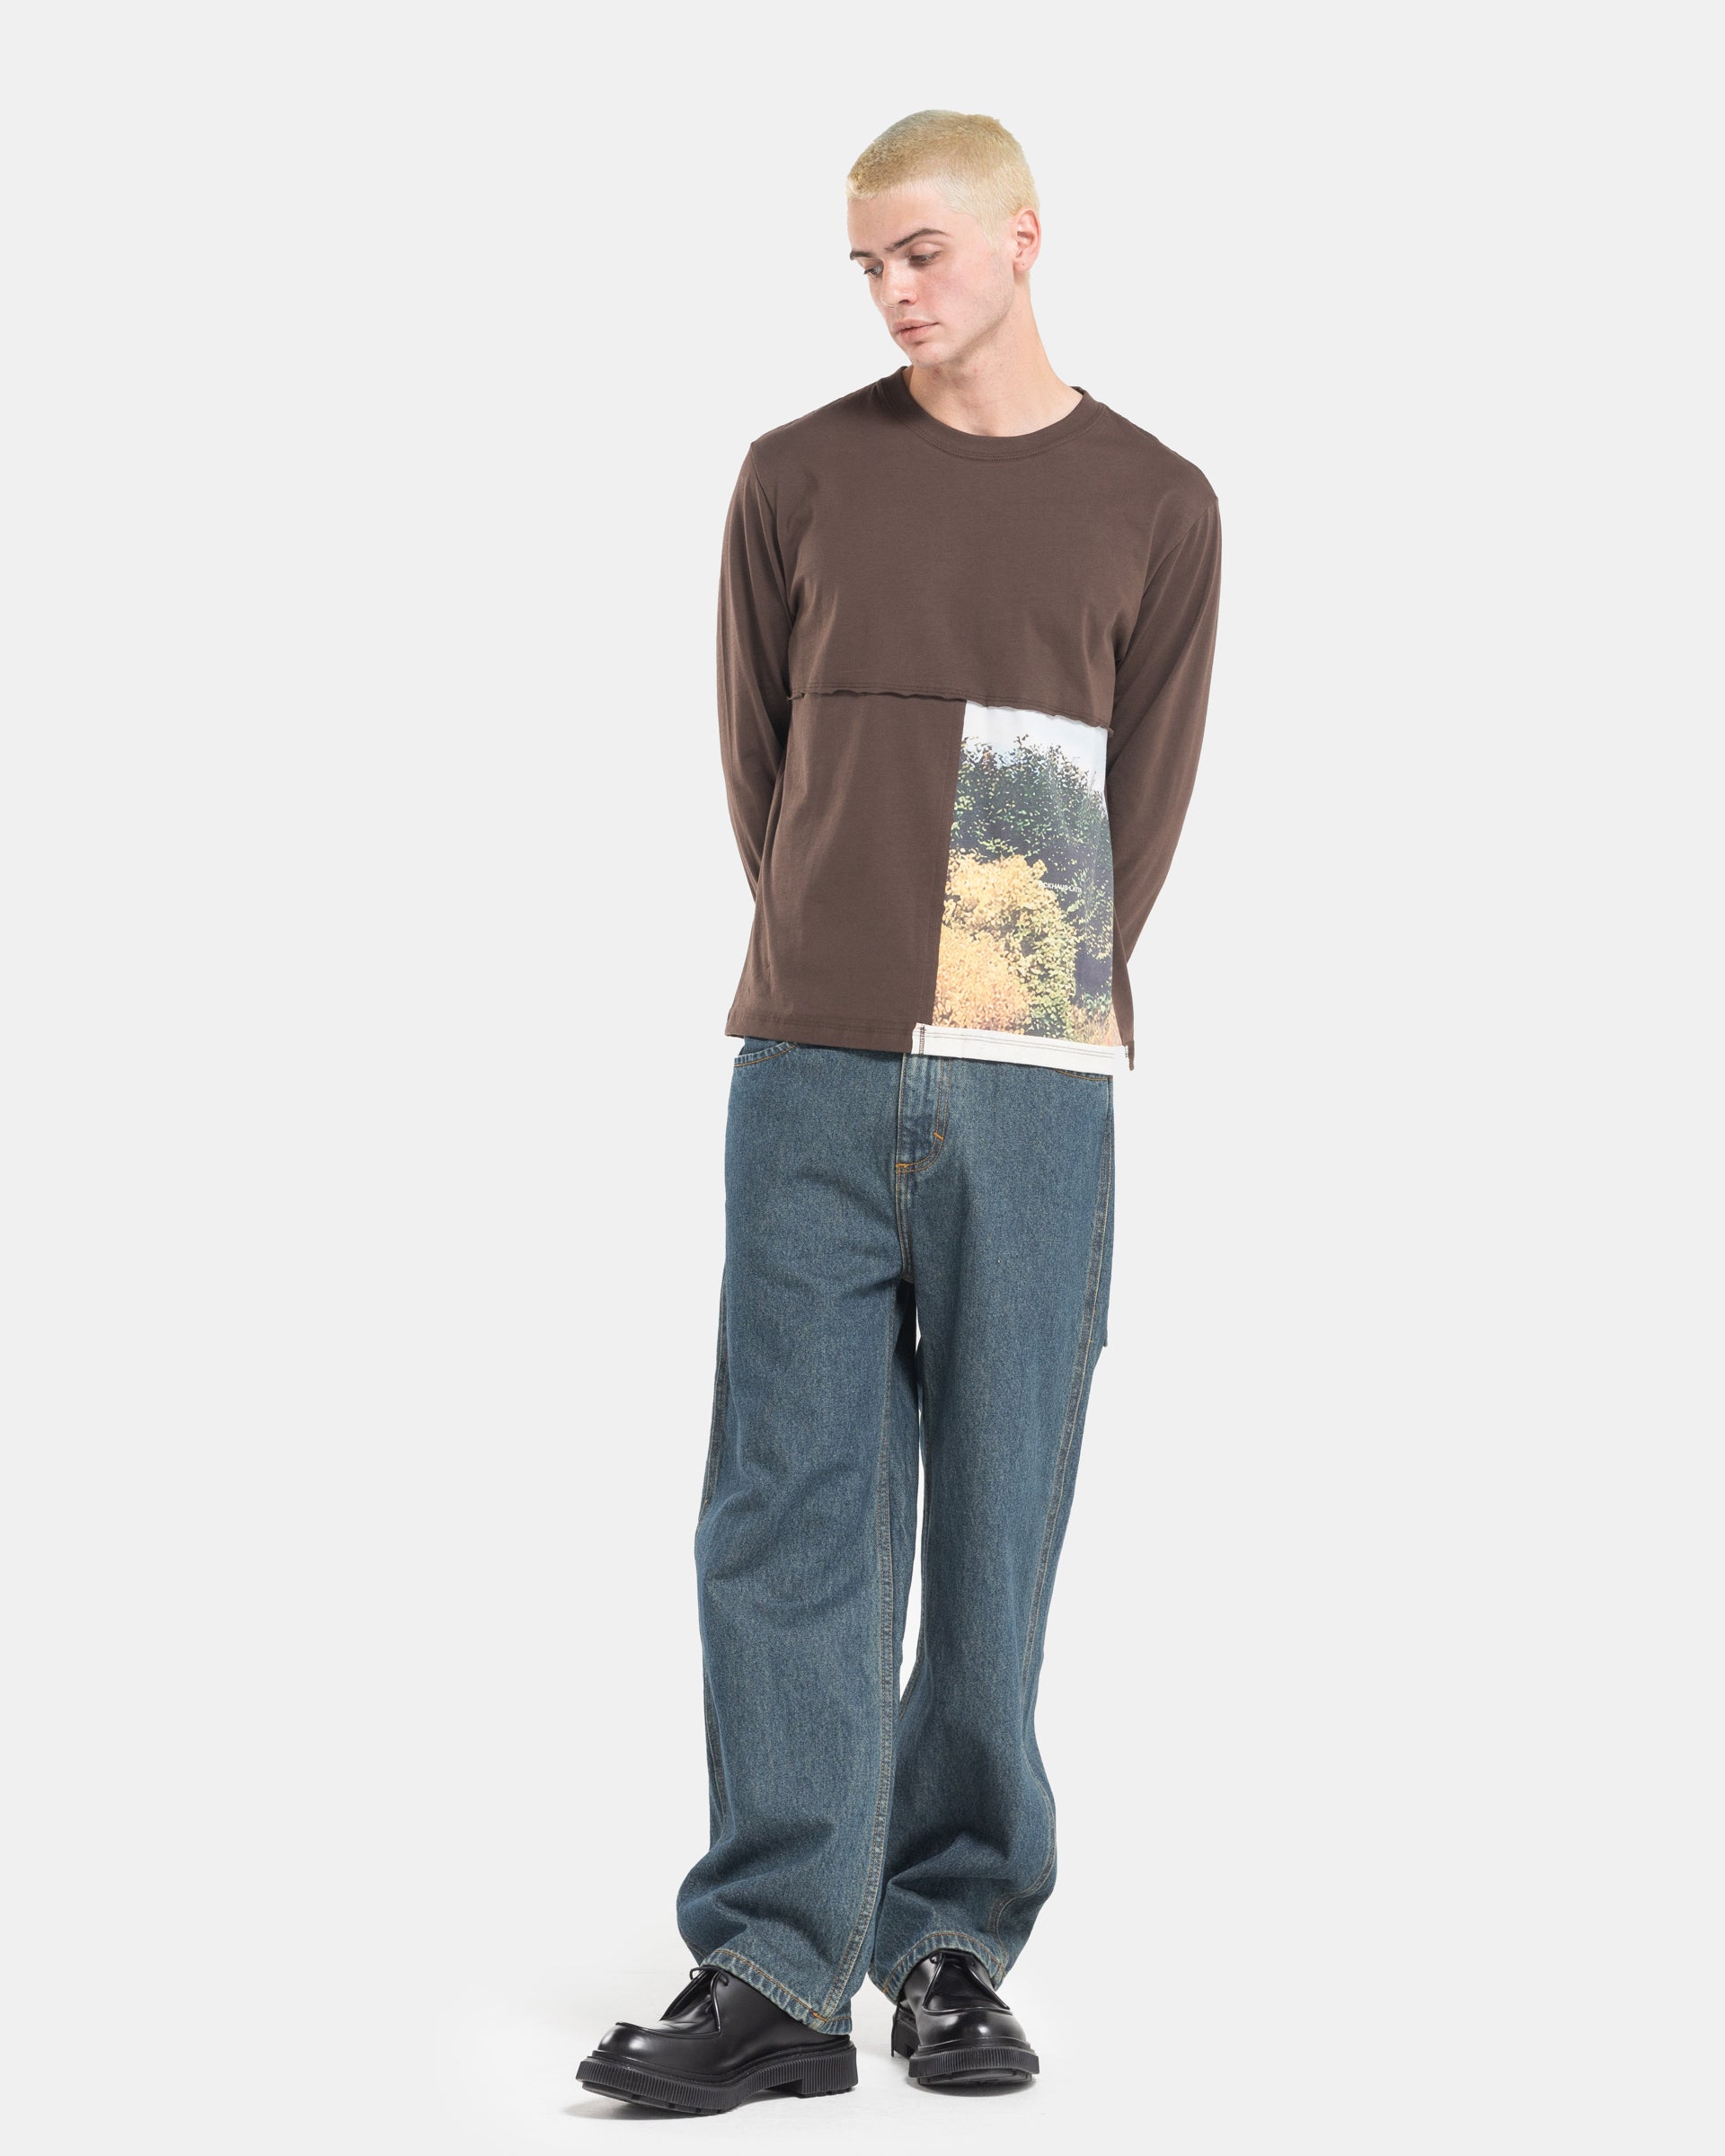 Male model wearing a brown Eckhaus Latta Lapped Longsleeve T-shirt with a printed design.